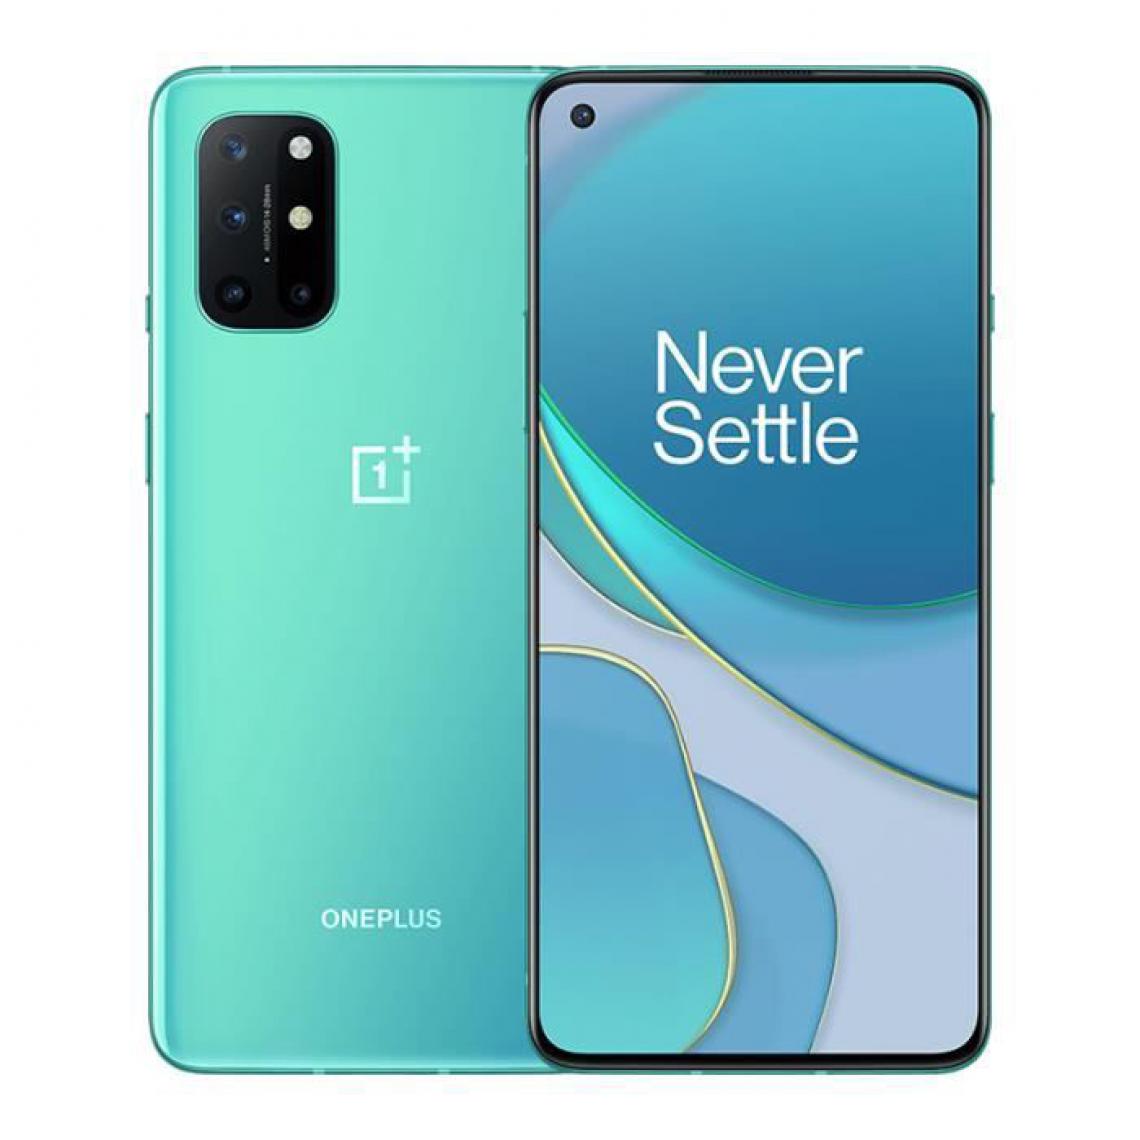 Oneplus - 8T - 12 / 256 Go - 5G - Vert - Smartphone Android